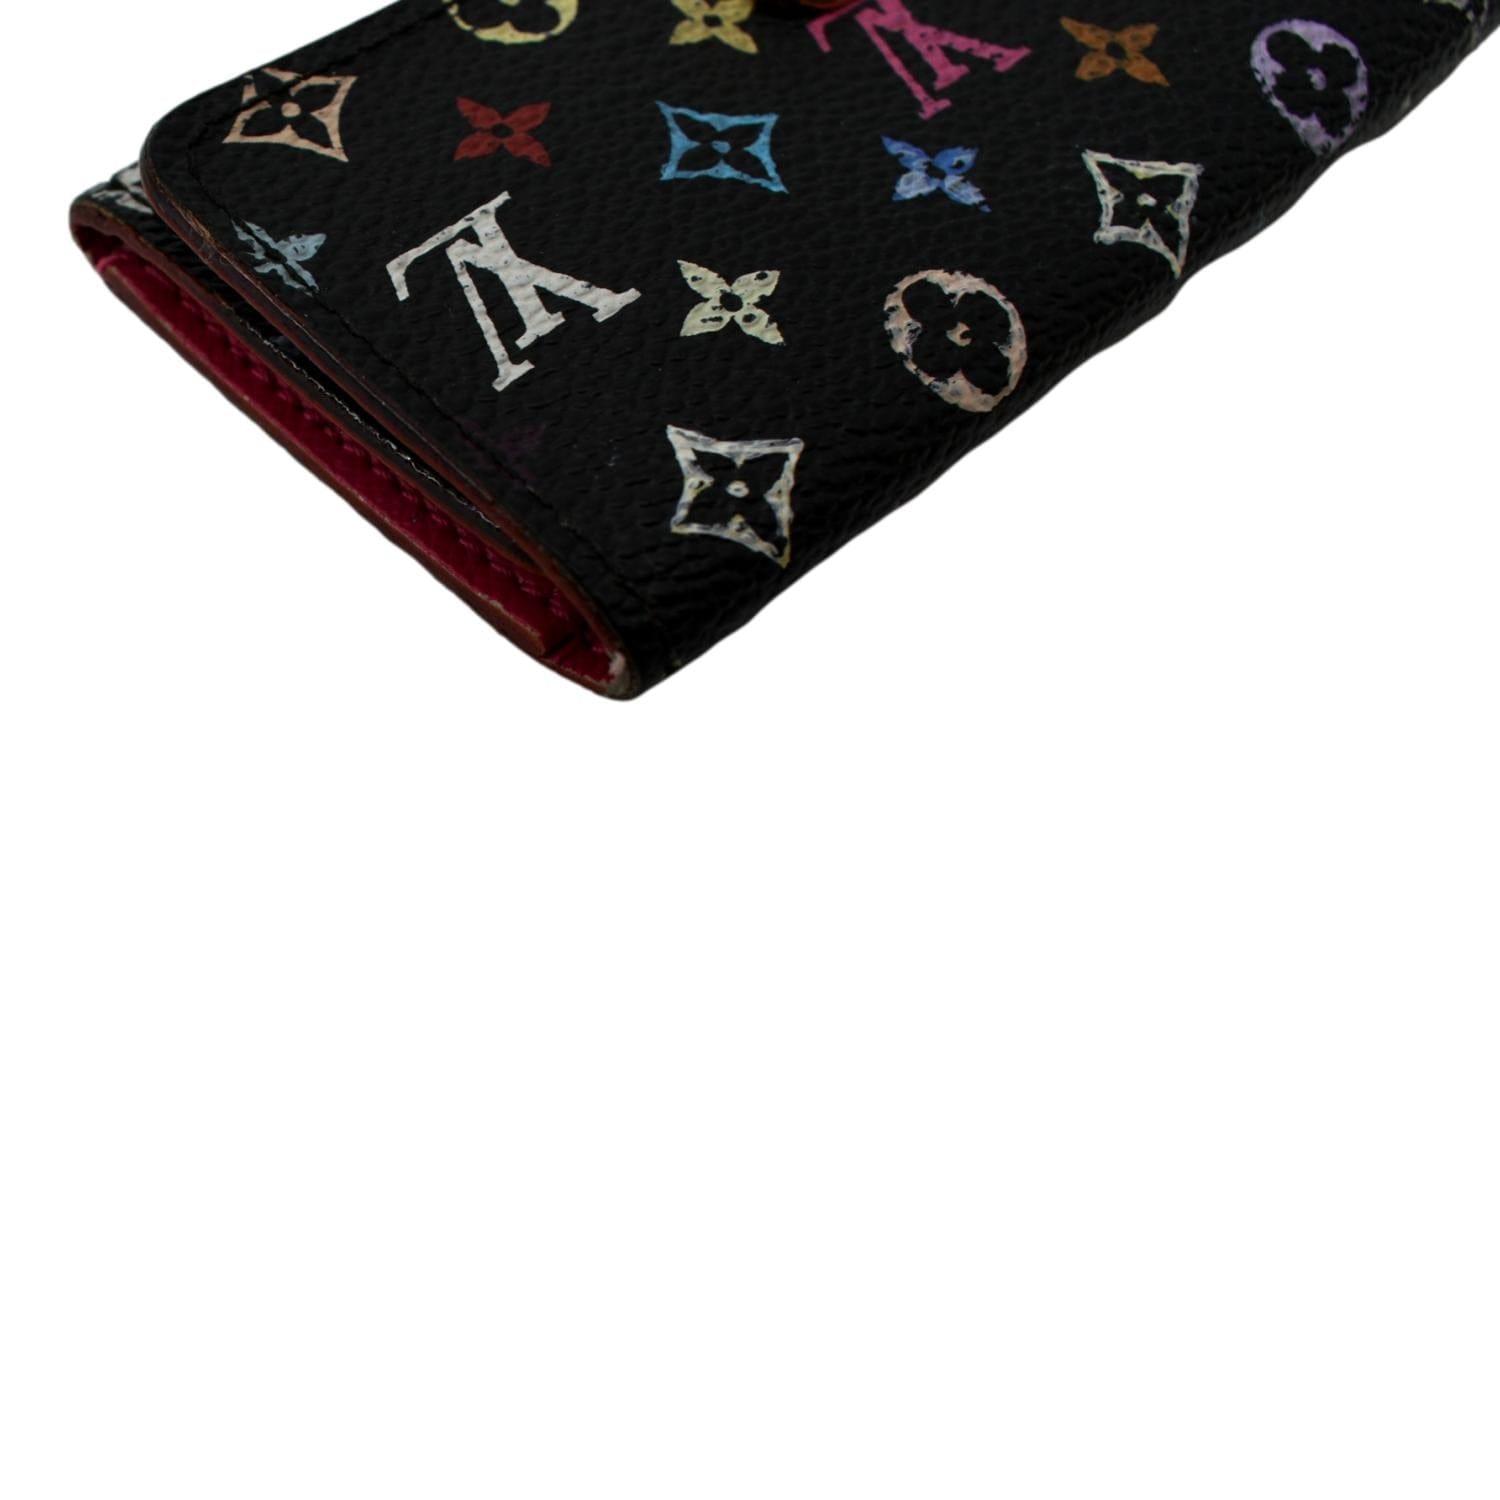 Louis Vuitton Key Pouches: Your Perfect Entry Into the Brand